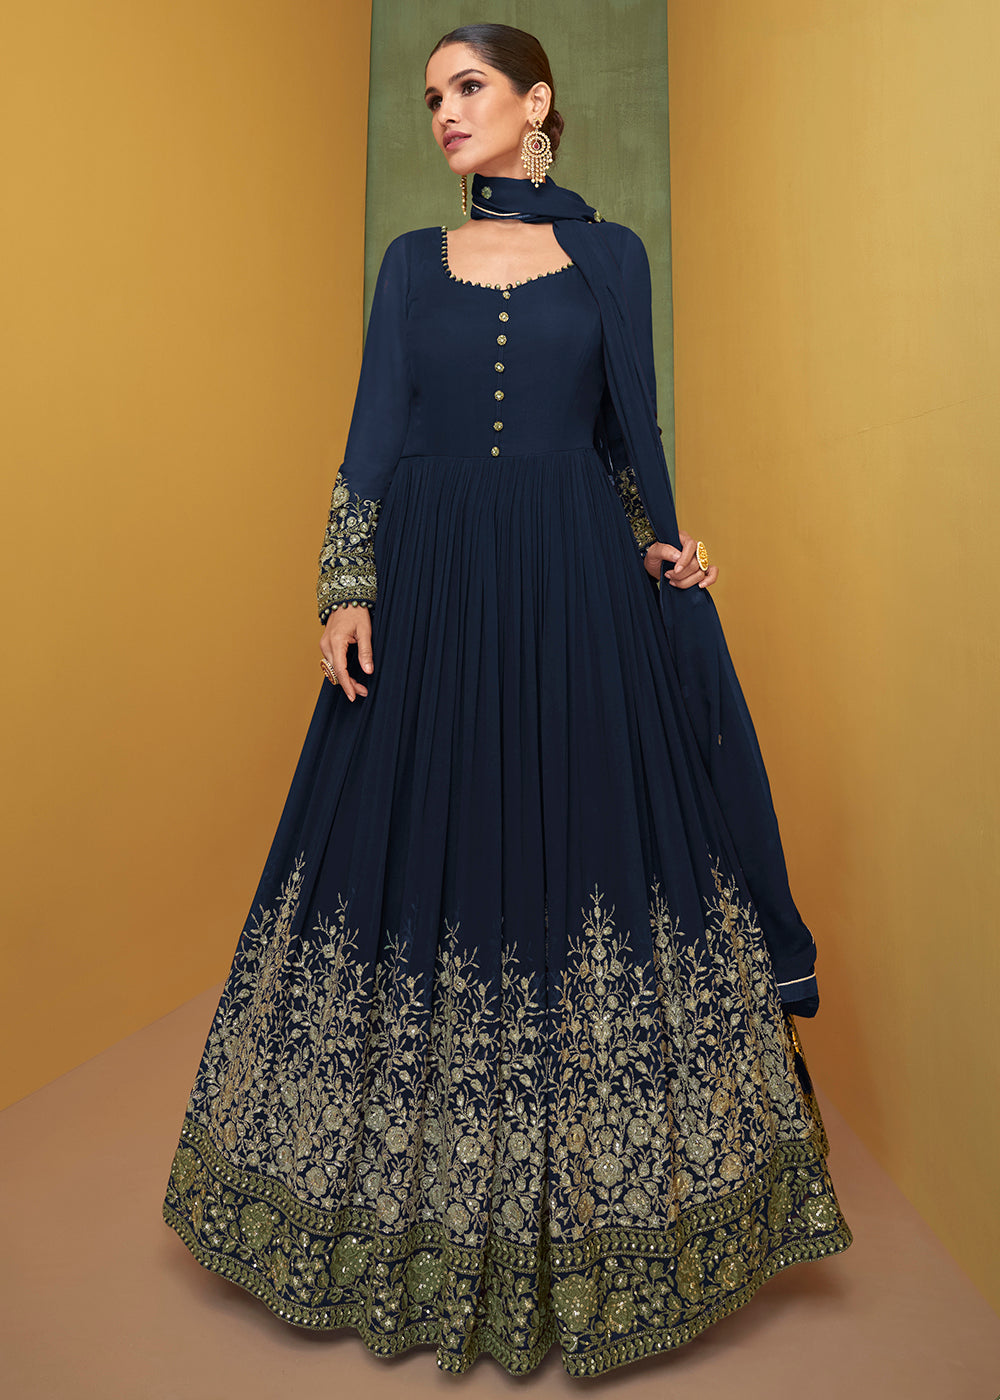 Buy Now Appealing Navy Blue Wedding Embroidered Bridal Anarkali Gown Online in USA, UK, Australia, New Zealand, Canada & Worldwide at Empress Clothing.